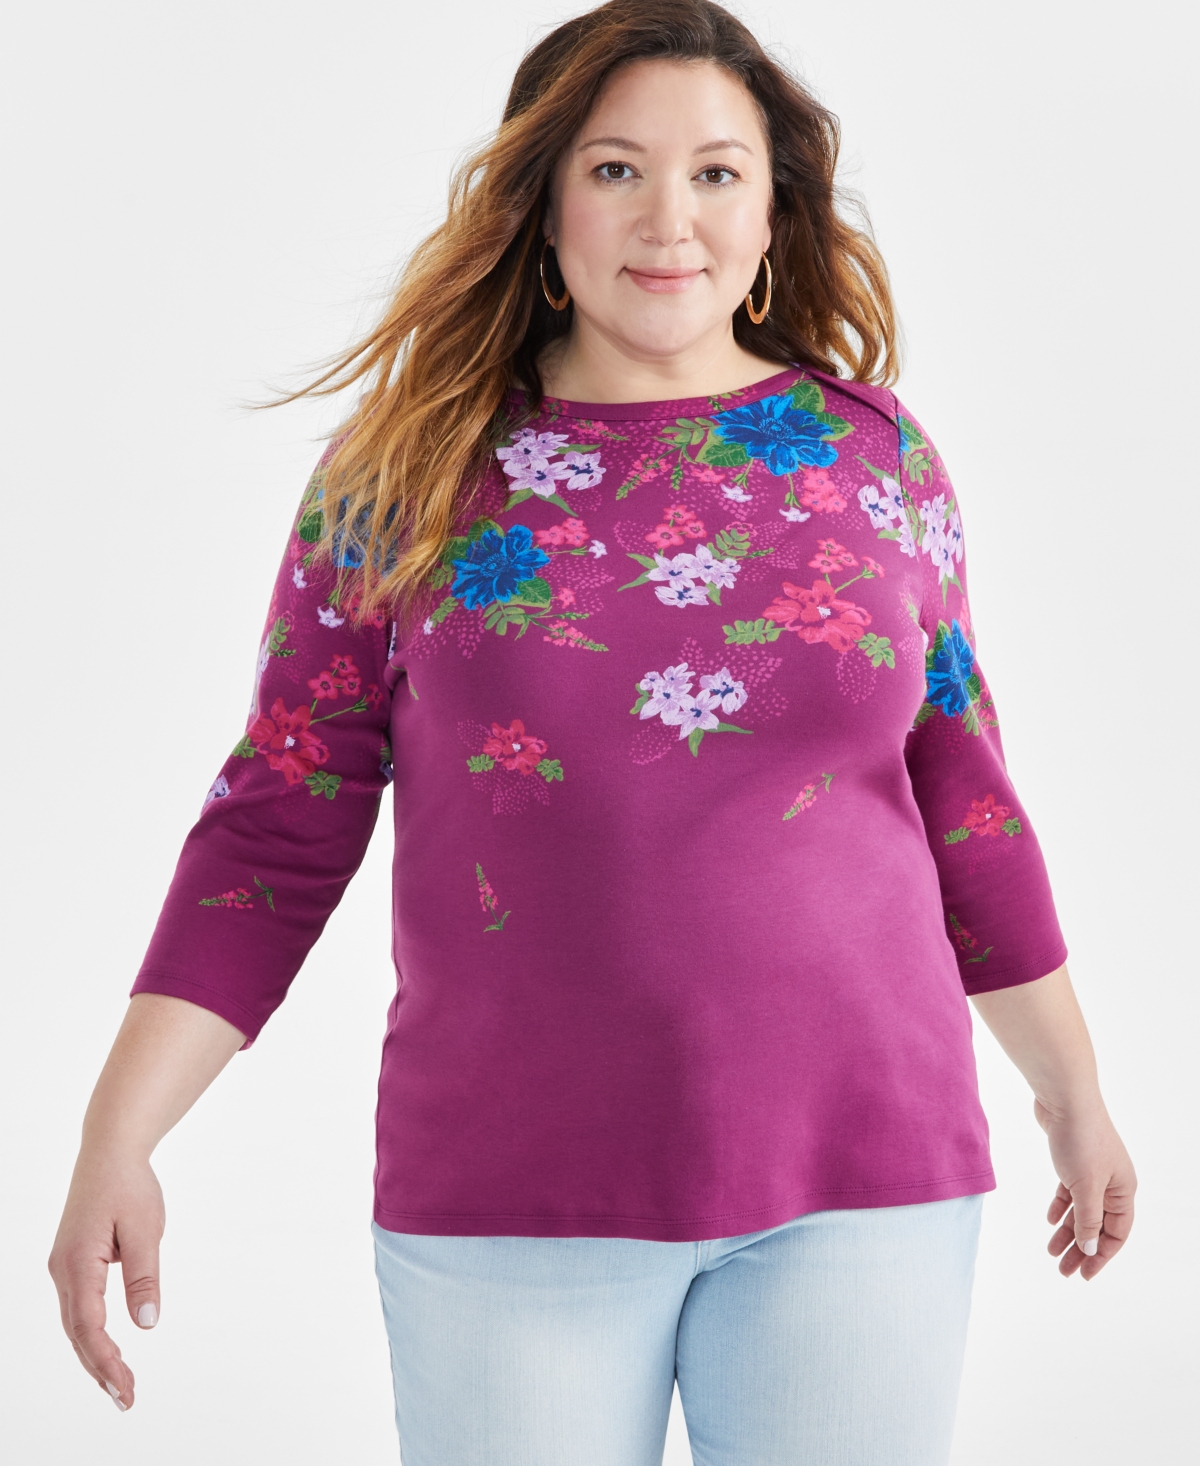 Plus Size Printed Pima Cotton Top, Created for Macy's - Floral Purple